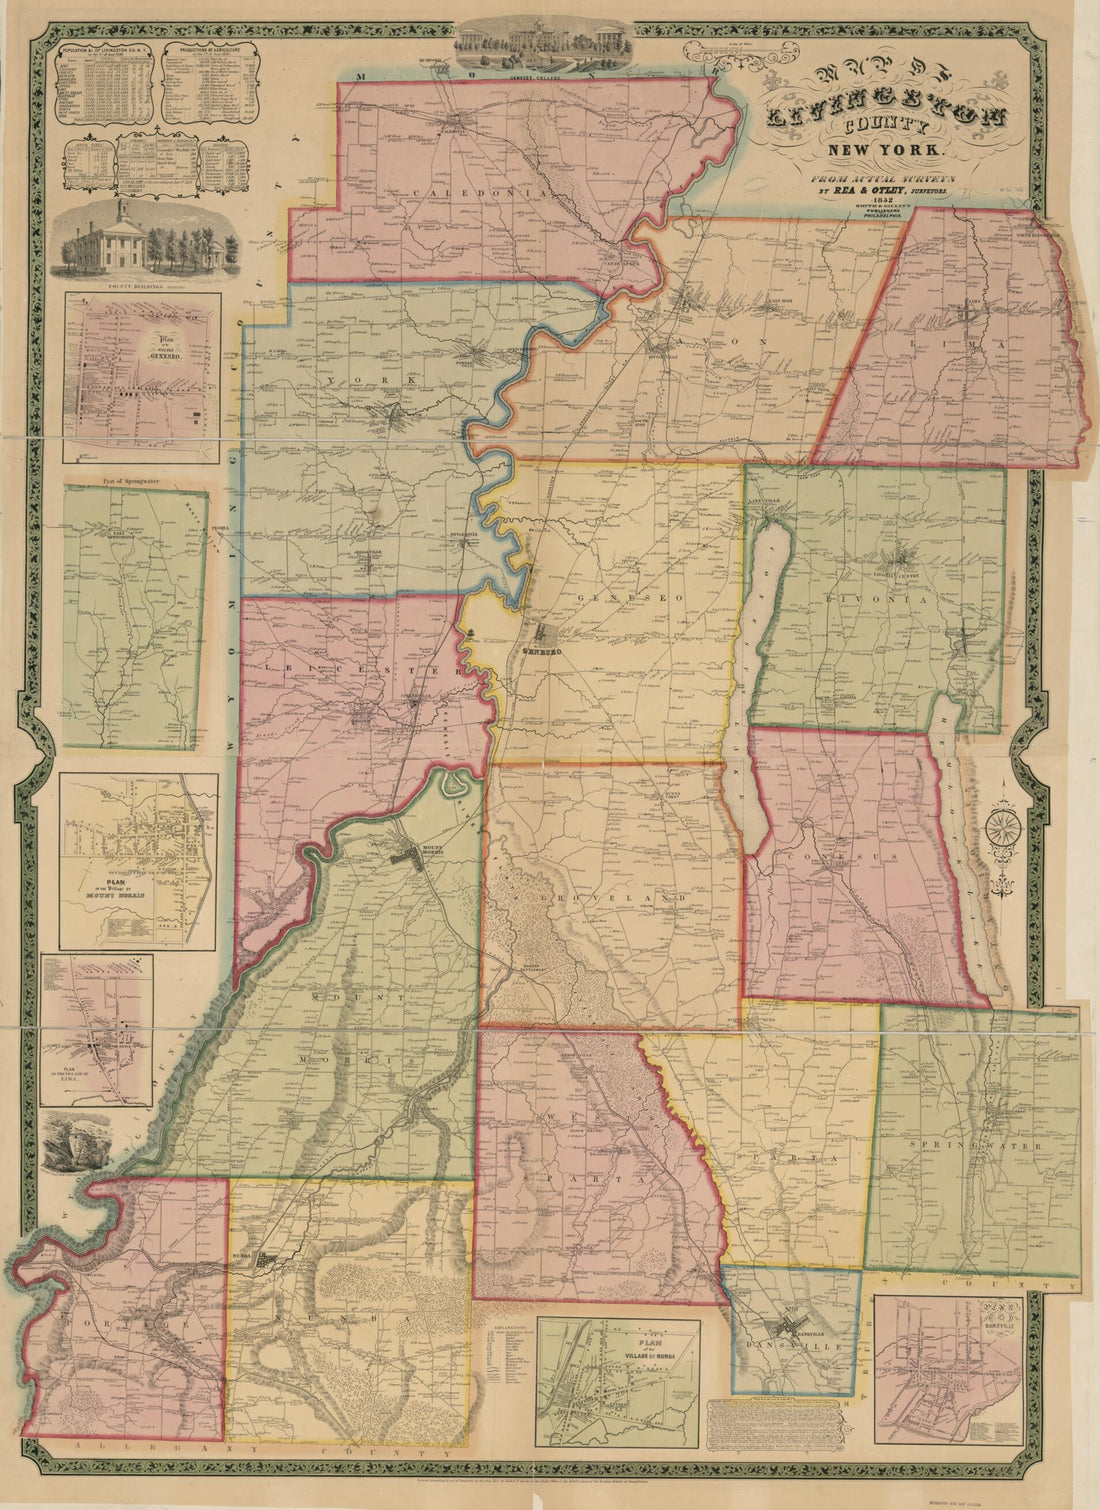 This old map of Map of Livingston County, New York : from Actual Surveys from 1852 was created by  Rea &amp; Otley,  Smith &amp; Gillett, Robert Pearsall Smith in 1852